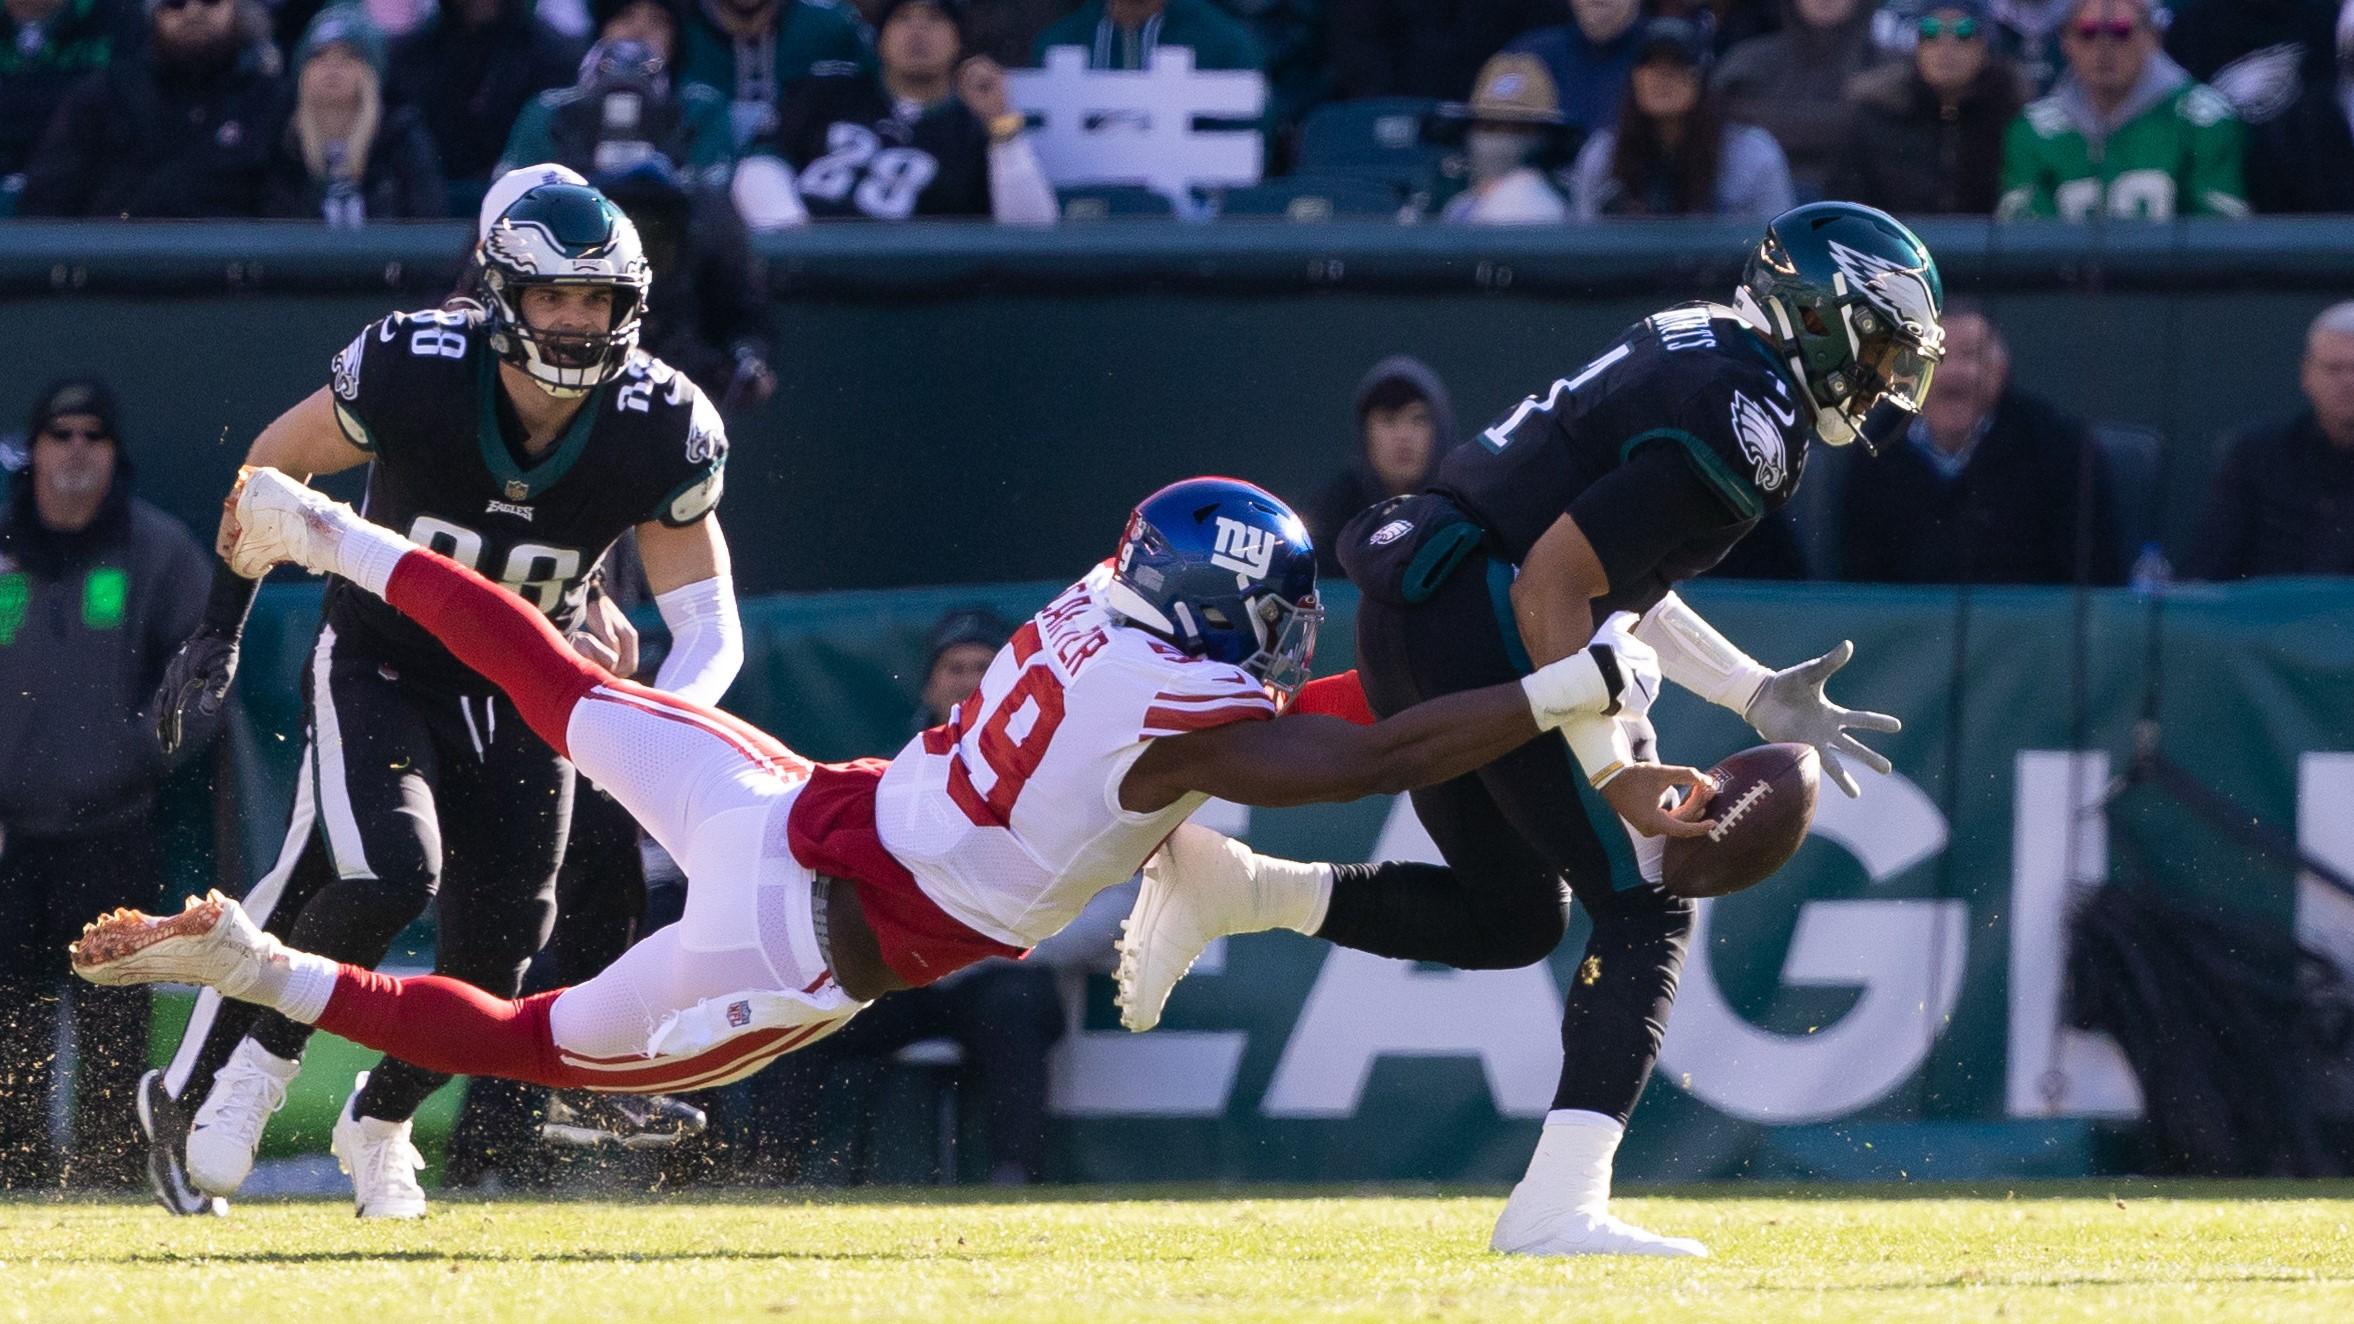 Dec 26, 2021; Philadelphia, Pennsylvania, USA; Philadelphia Eagles quarterback Jalen Hurts (1) fumbles the ball while being tackled by New York Giants outside linebacker Lorenzo Carter (59) during the first quarter at Lincoln Financial Field. / Bill Streicher-USA TODAY Sports